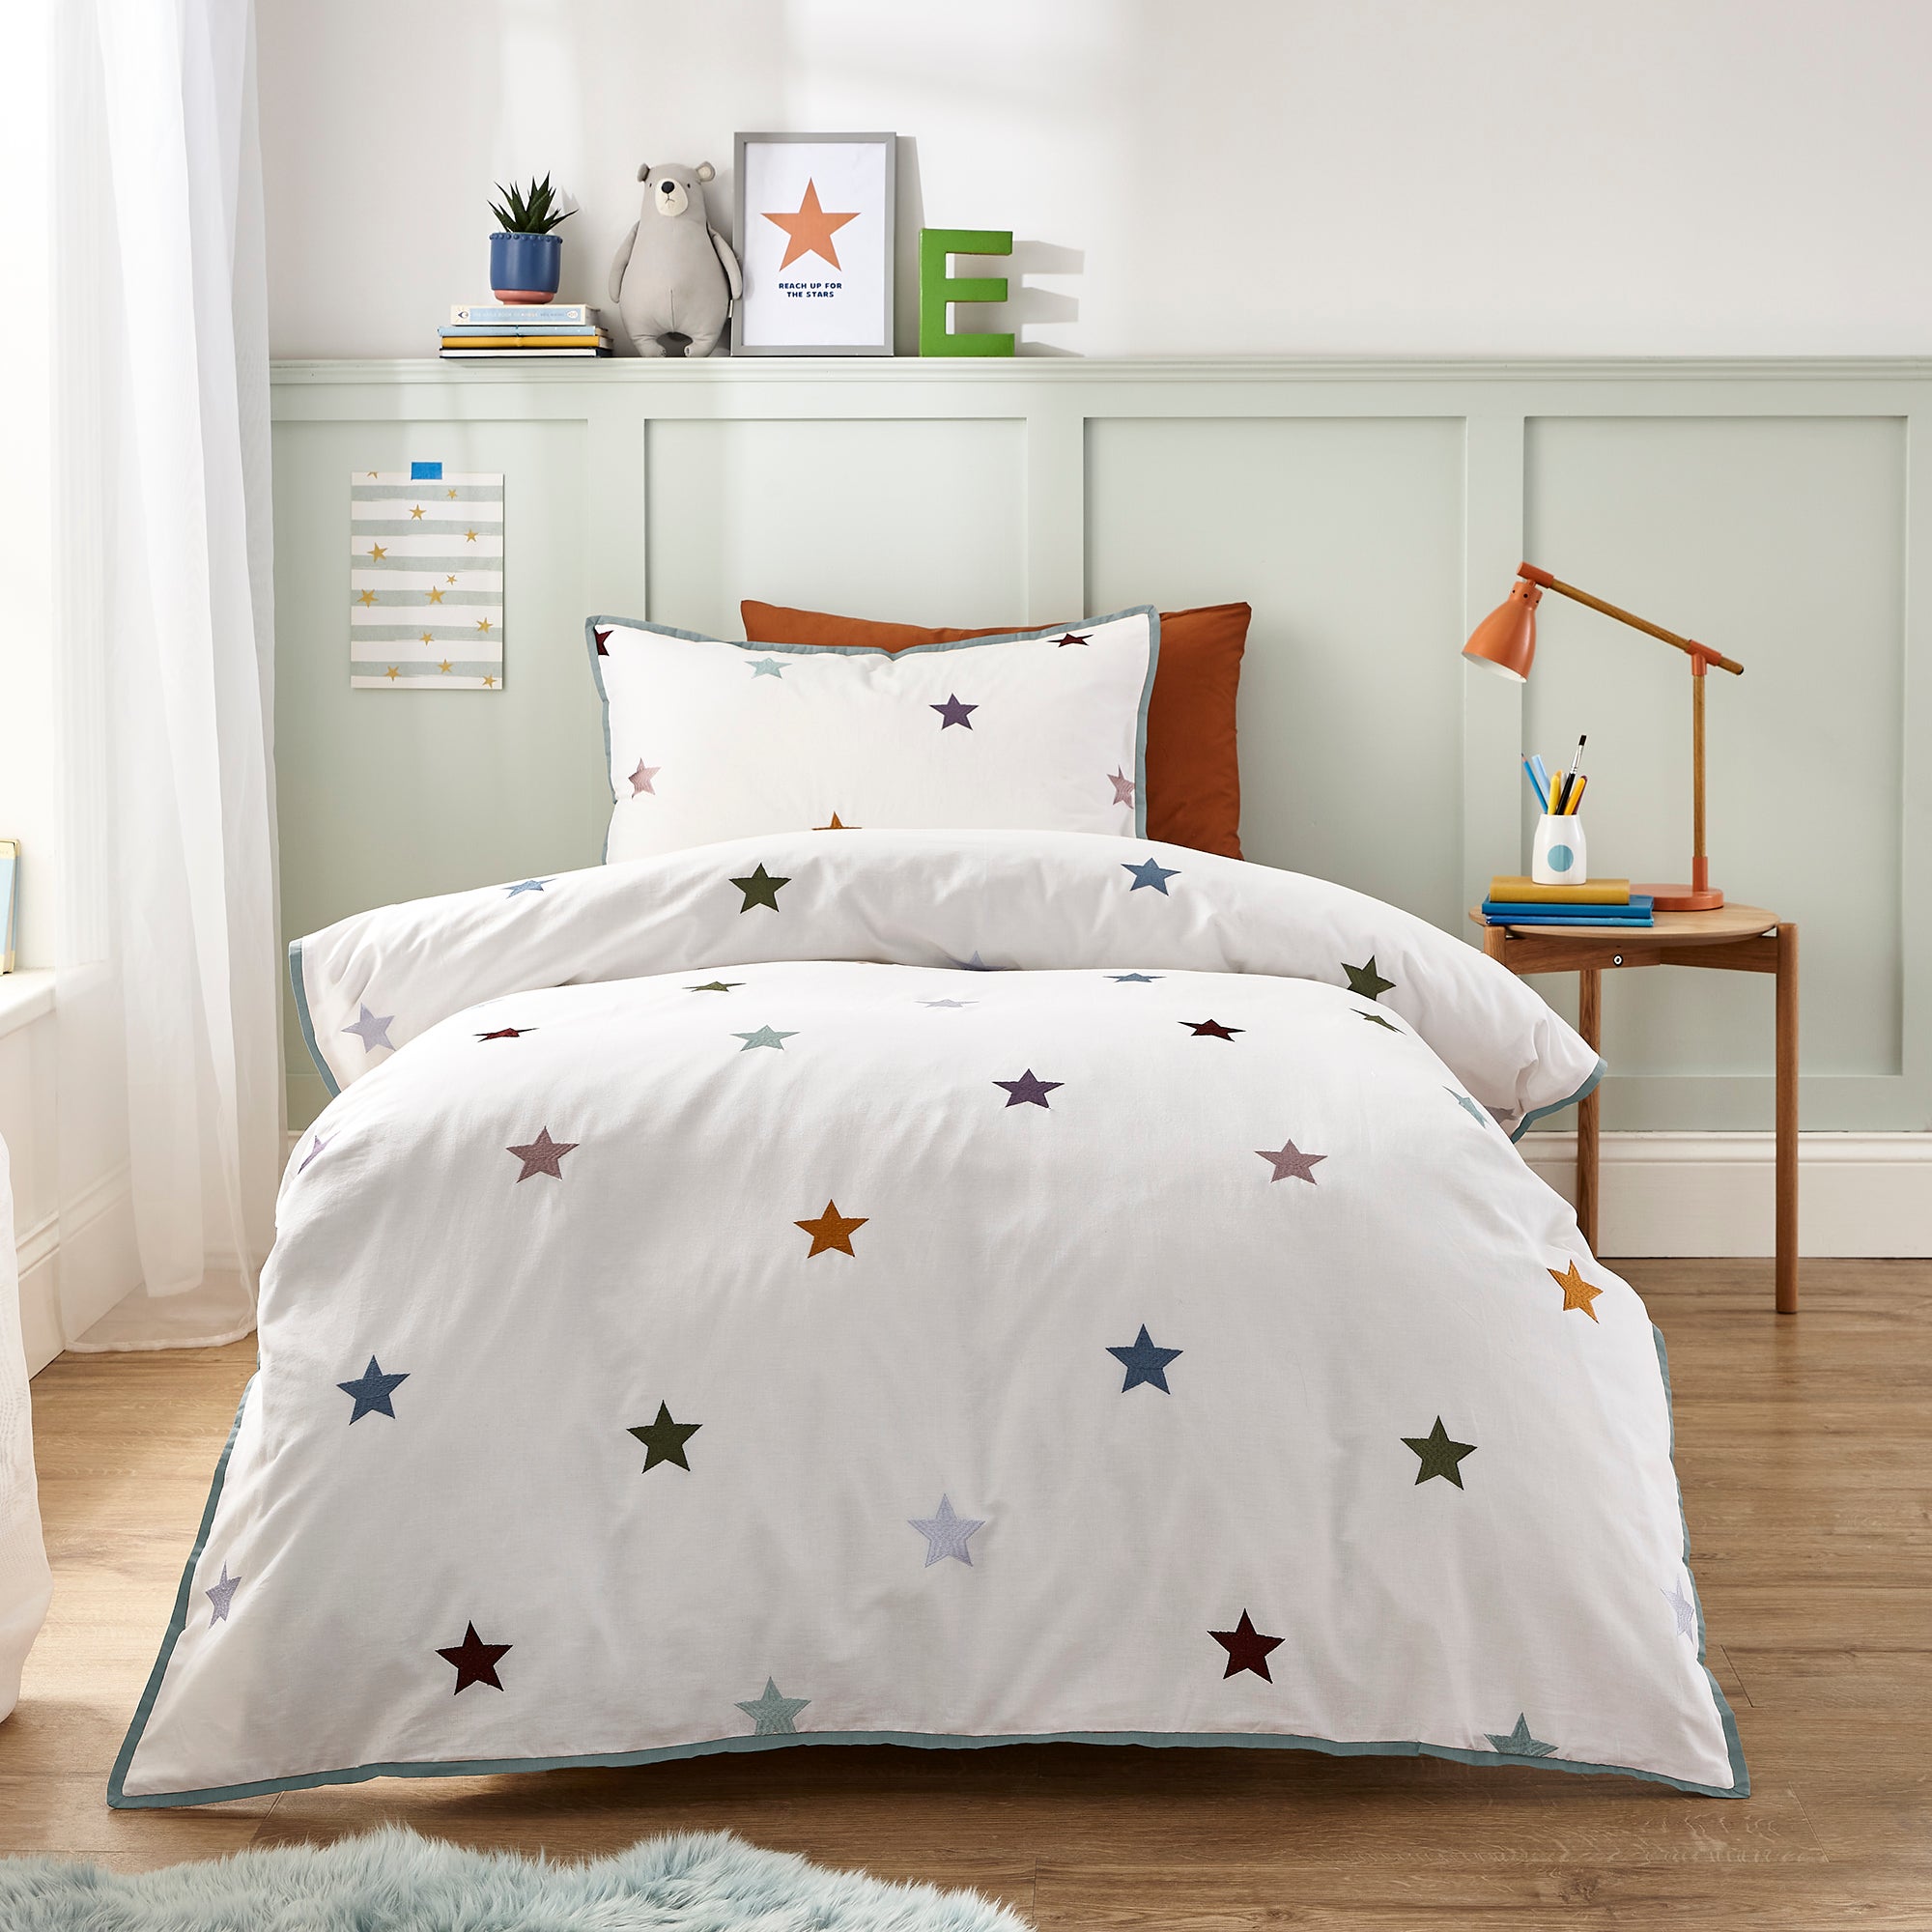 Embroidered Stars Single Duvet Cover and Pillowcase Set